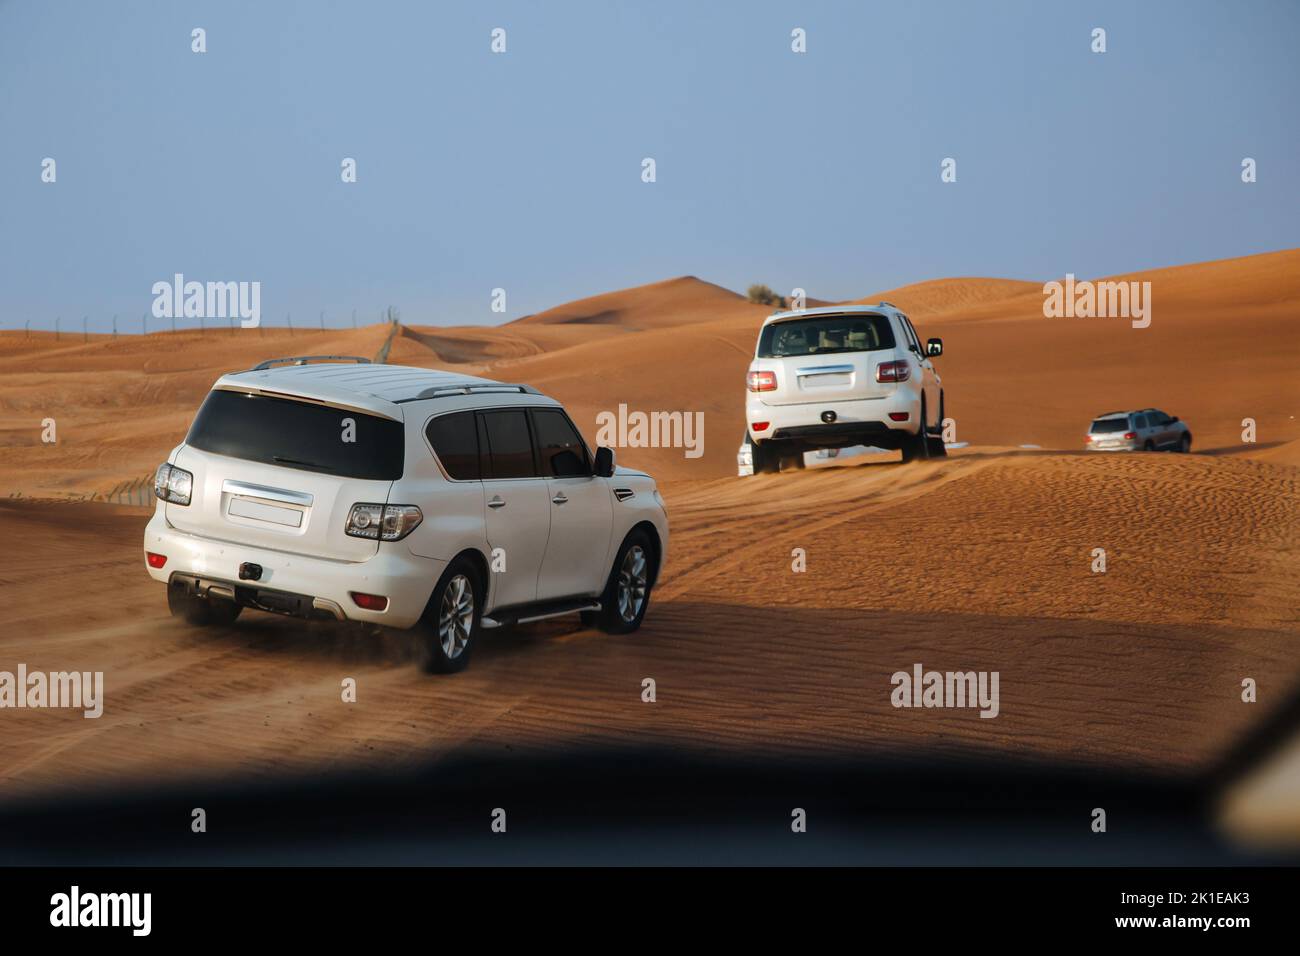 Dubai, United Arab Emirates - 01, July 2021 : Race in sand desert. Competition racing challenge desert. Car drives offroad with clouds of dust. Offroad vehicle racing with obstacles in wilderness Stock Photo